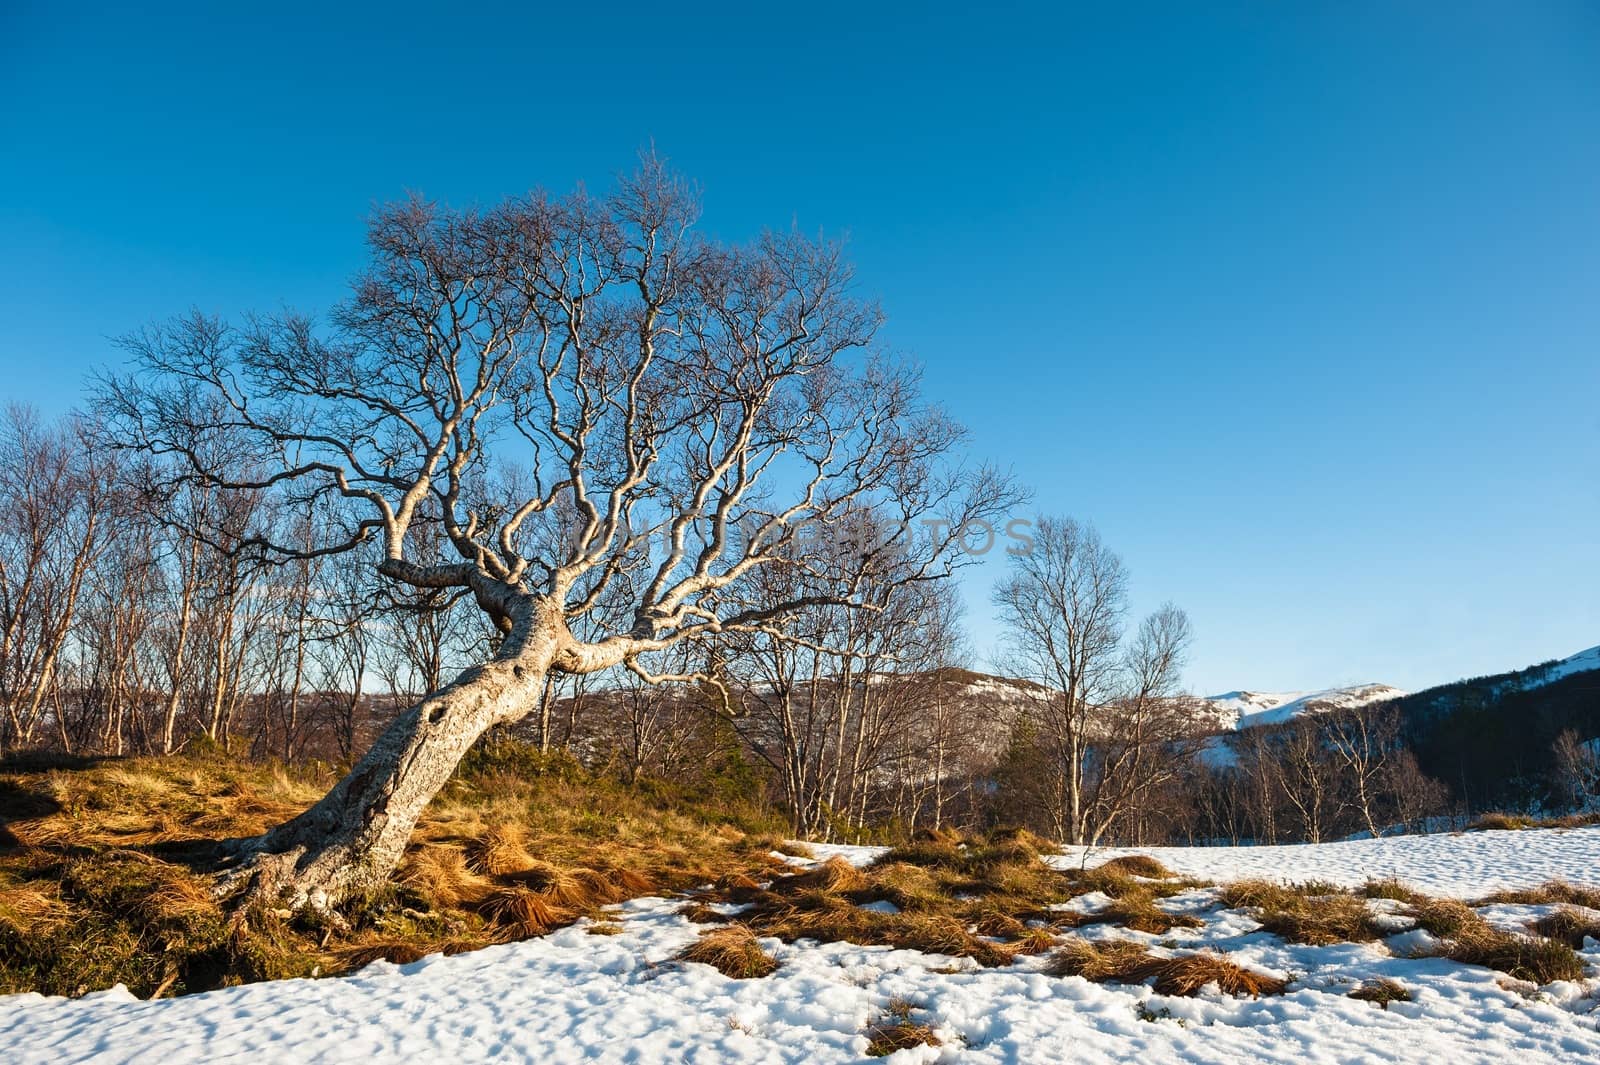 A bendt tree on mountain in Norway